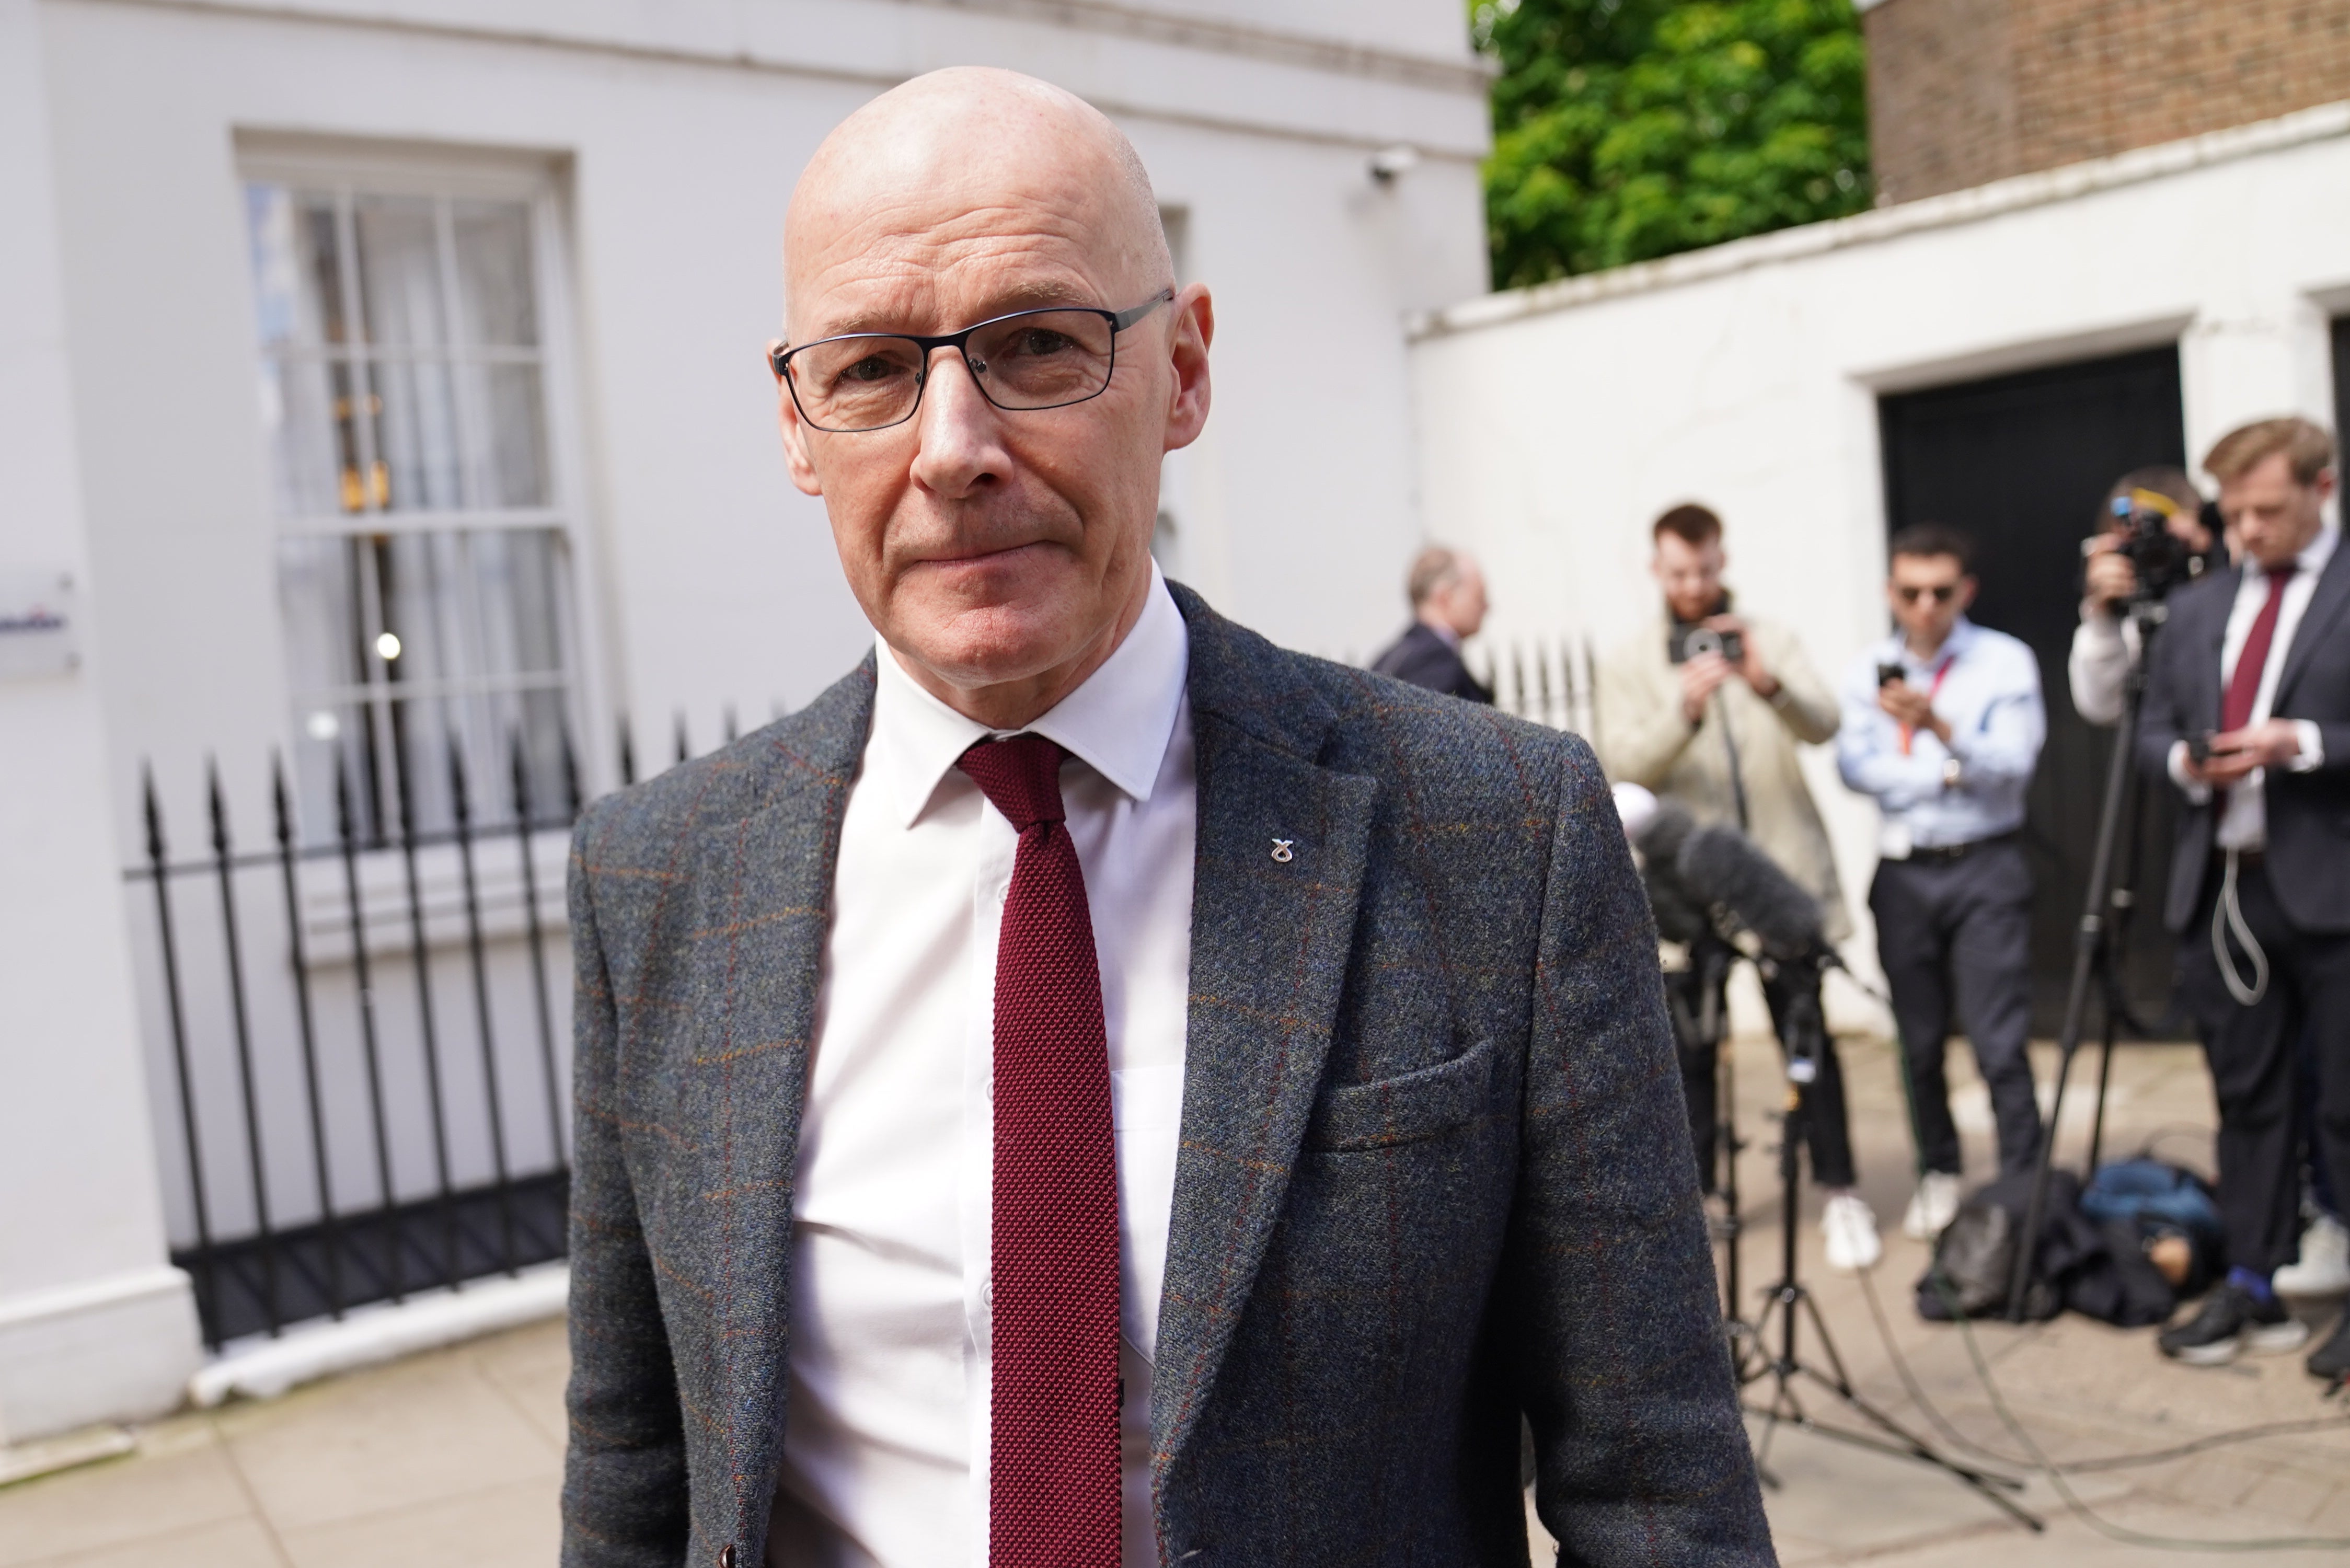 John Swinney said he will ‘consider what the first minister says’